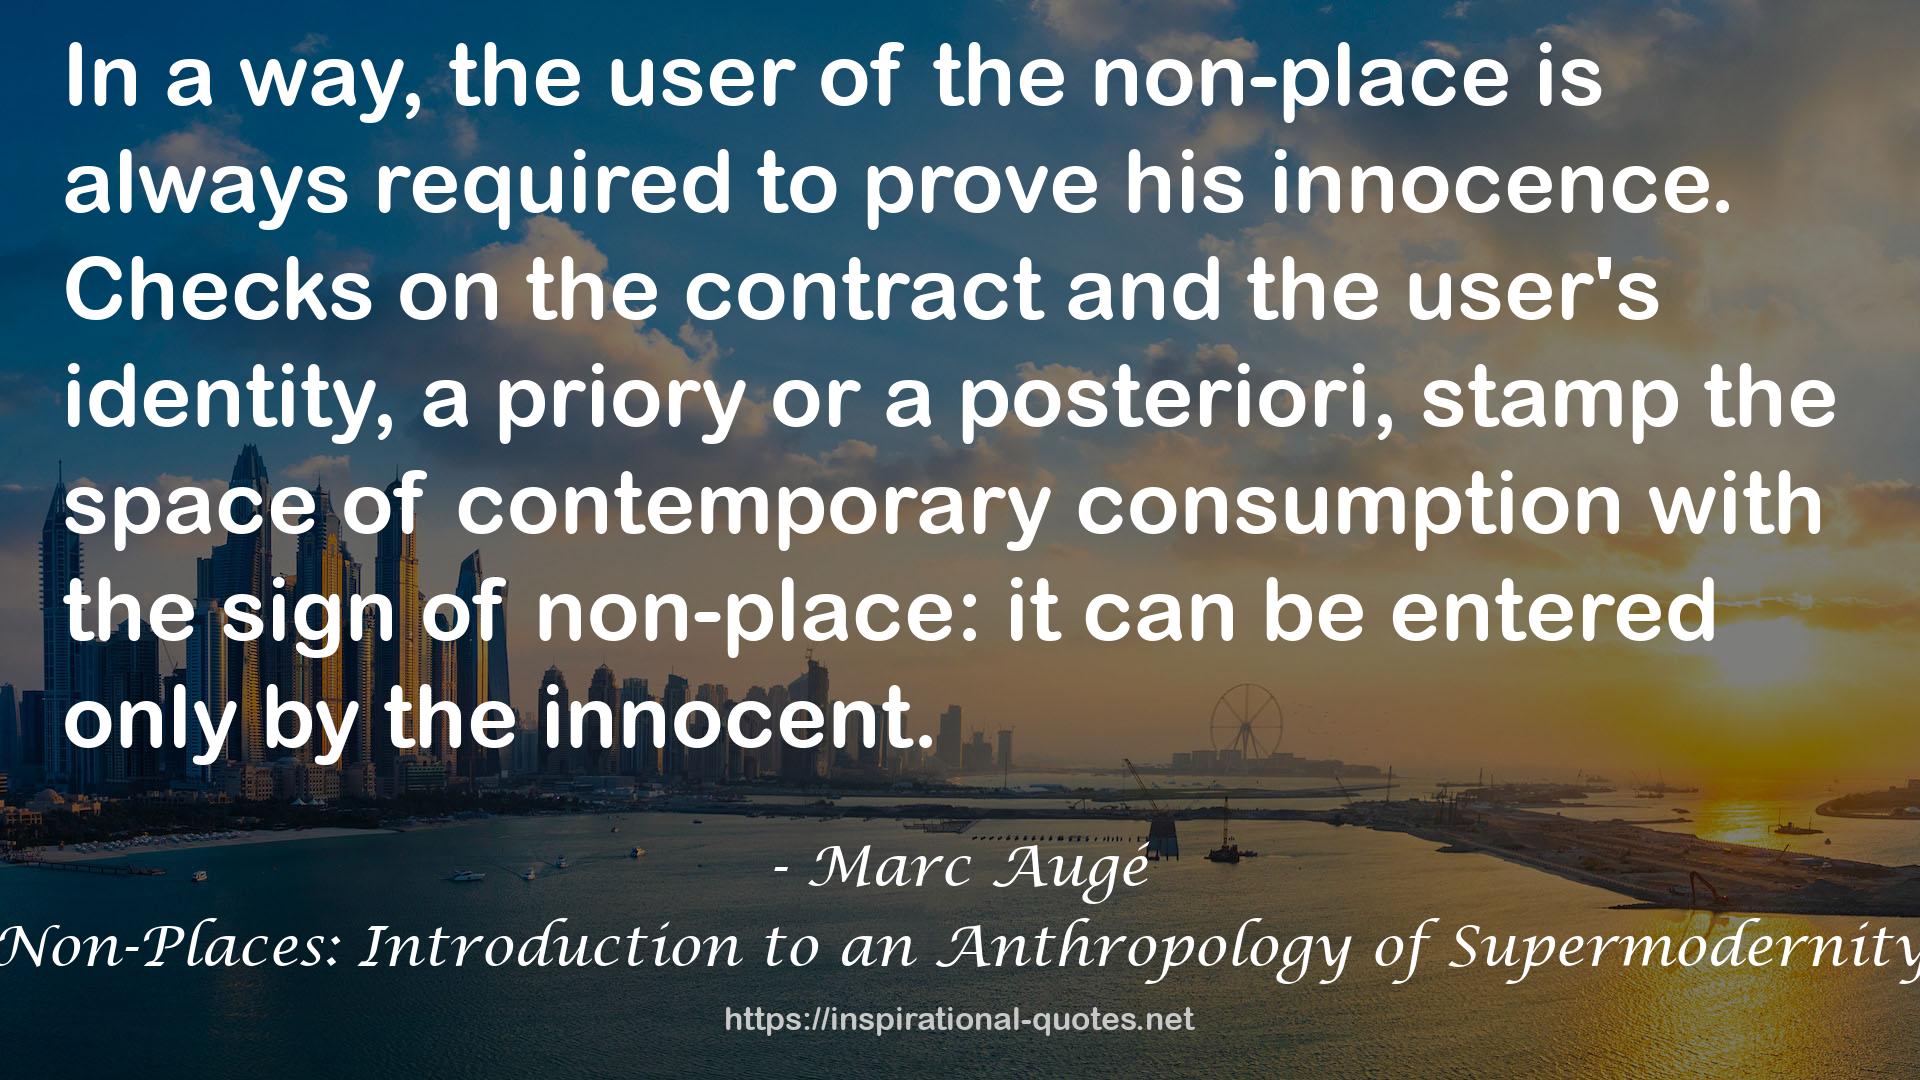 Non-Places: Introduction to an Anthropology of Supermodernity QUOTES